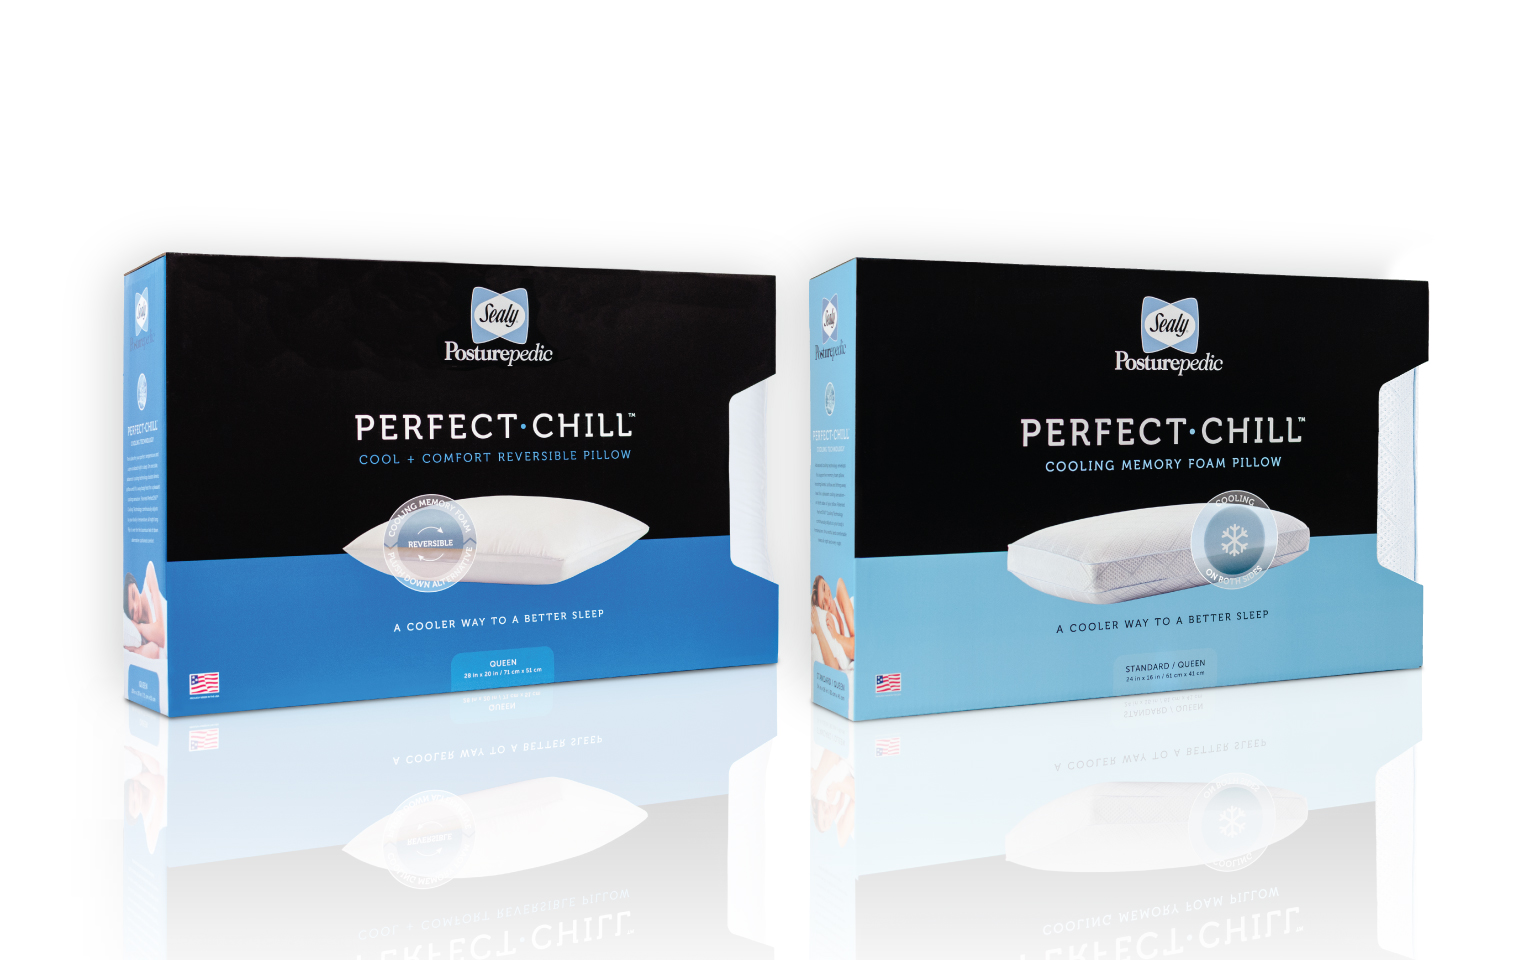 Sealy Cool Perfect Chill Pillow Packaging